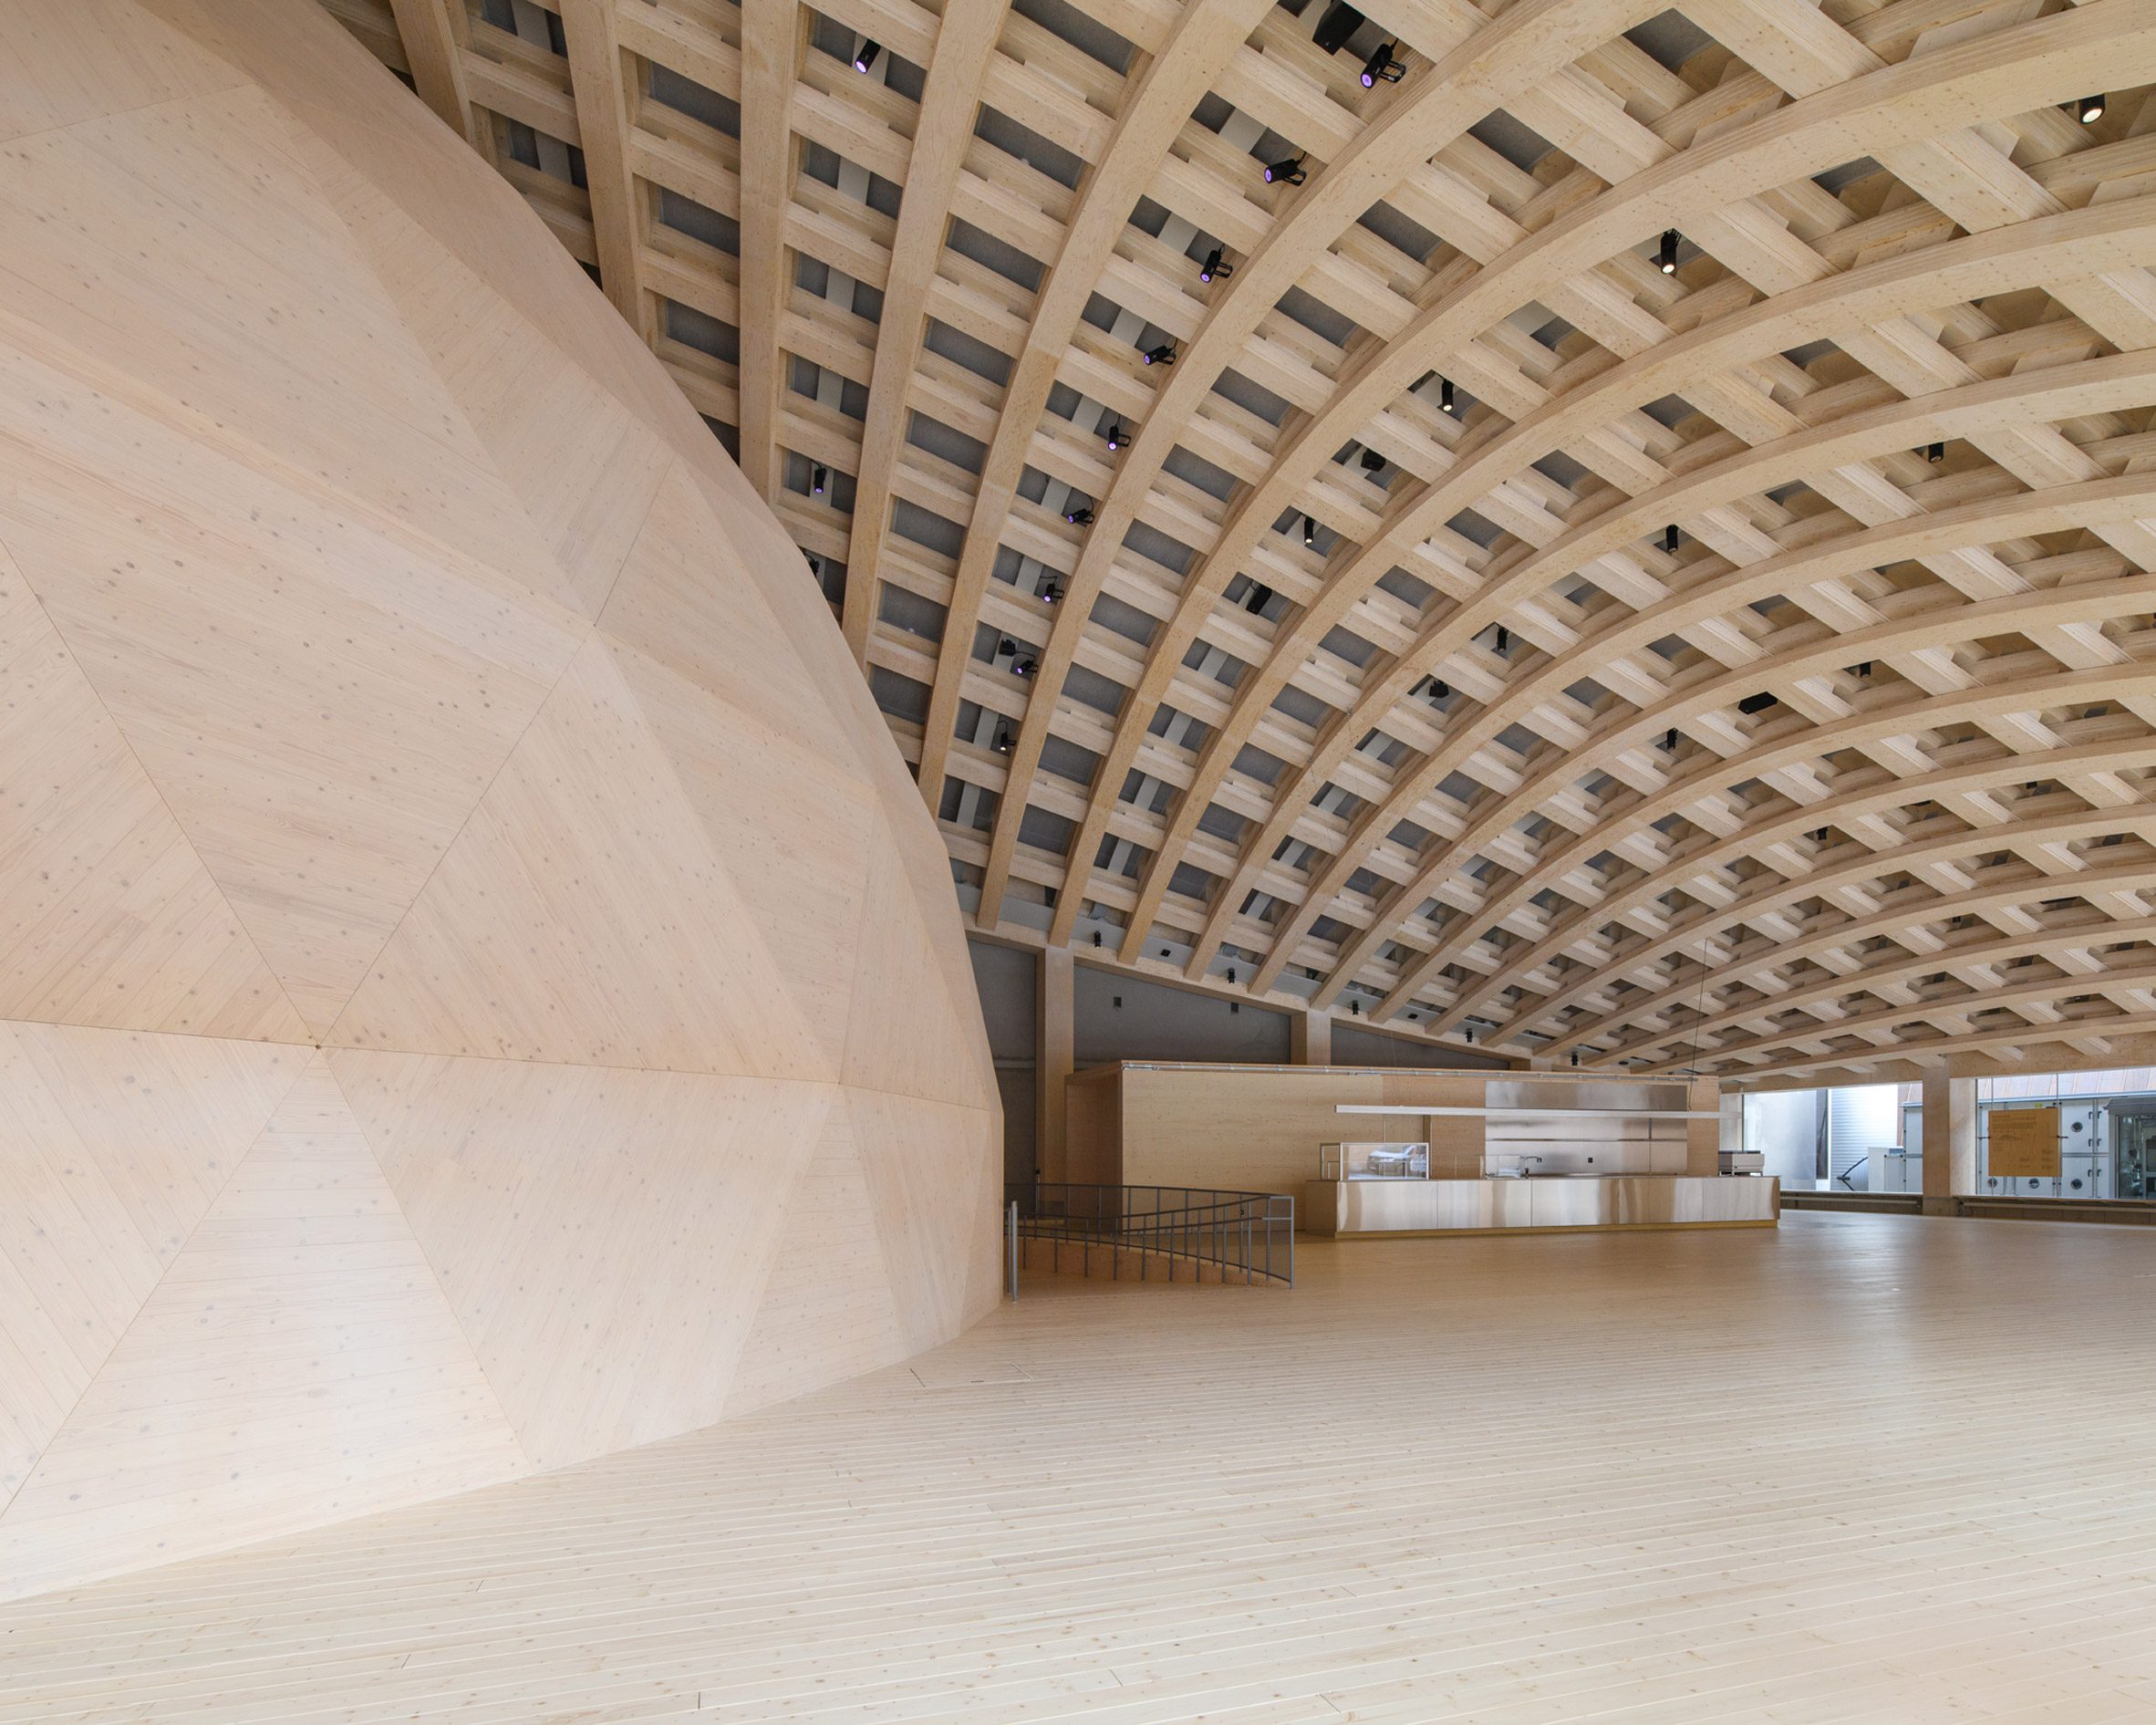 Gridshell timber structure